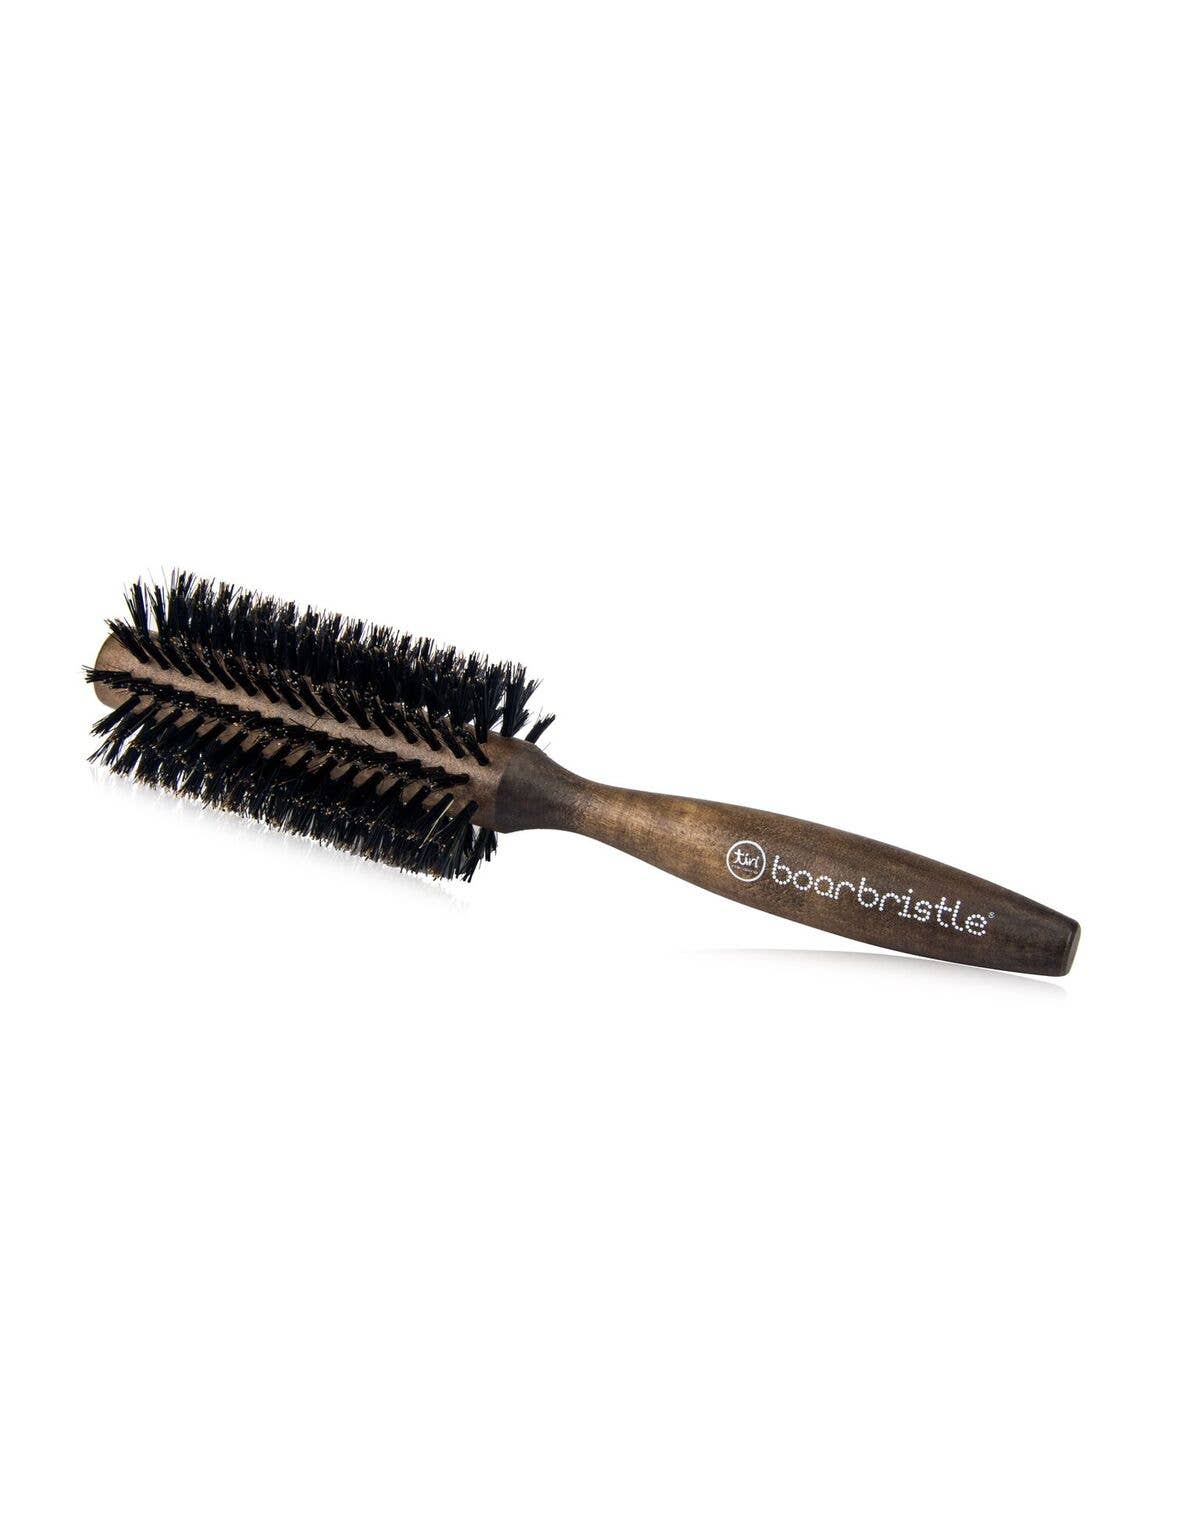 50mm Professional Round Brush with Boar Bristle